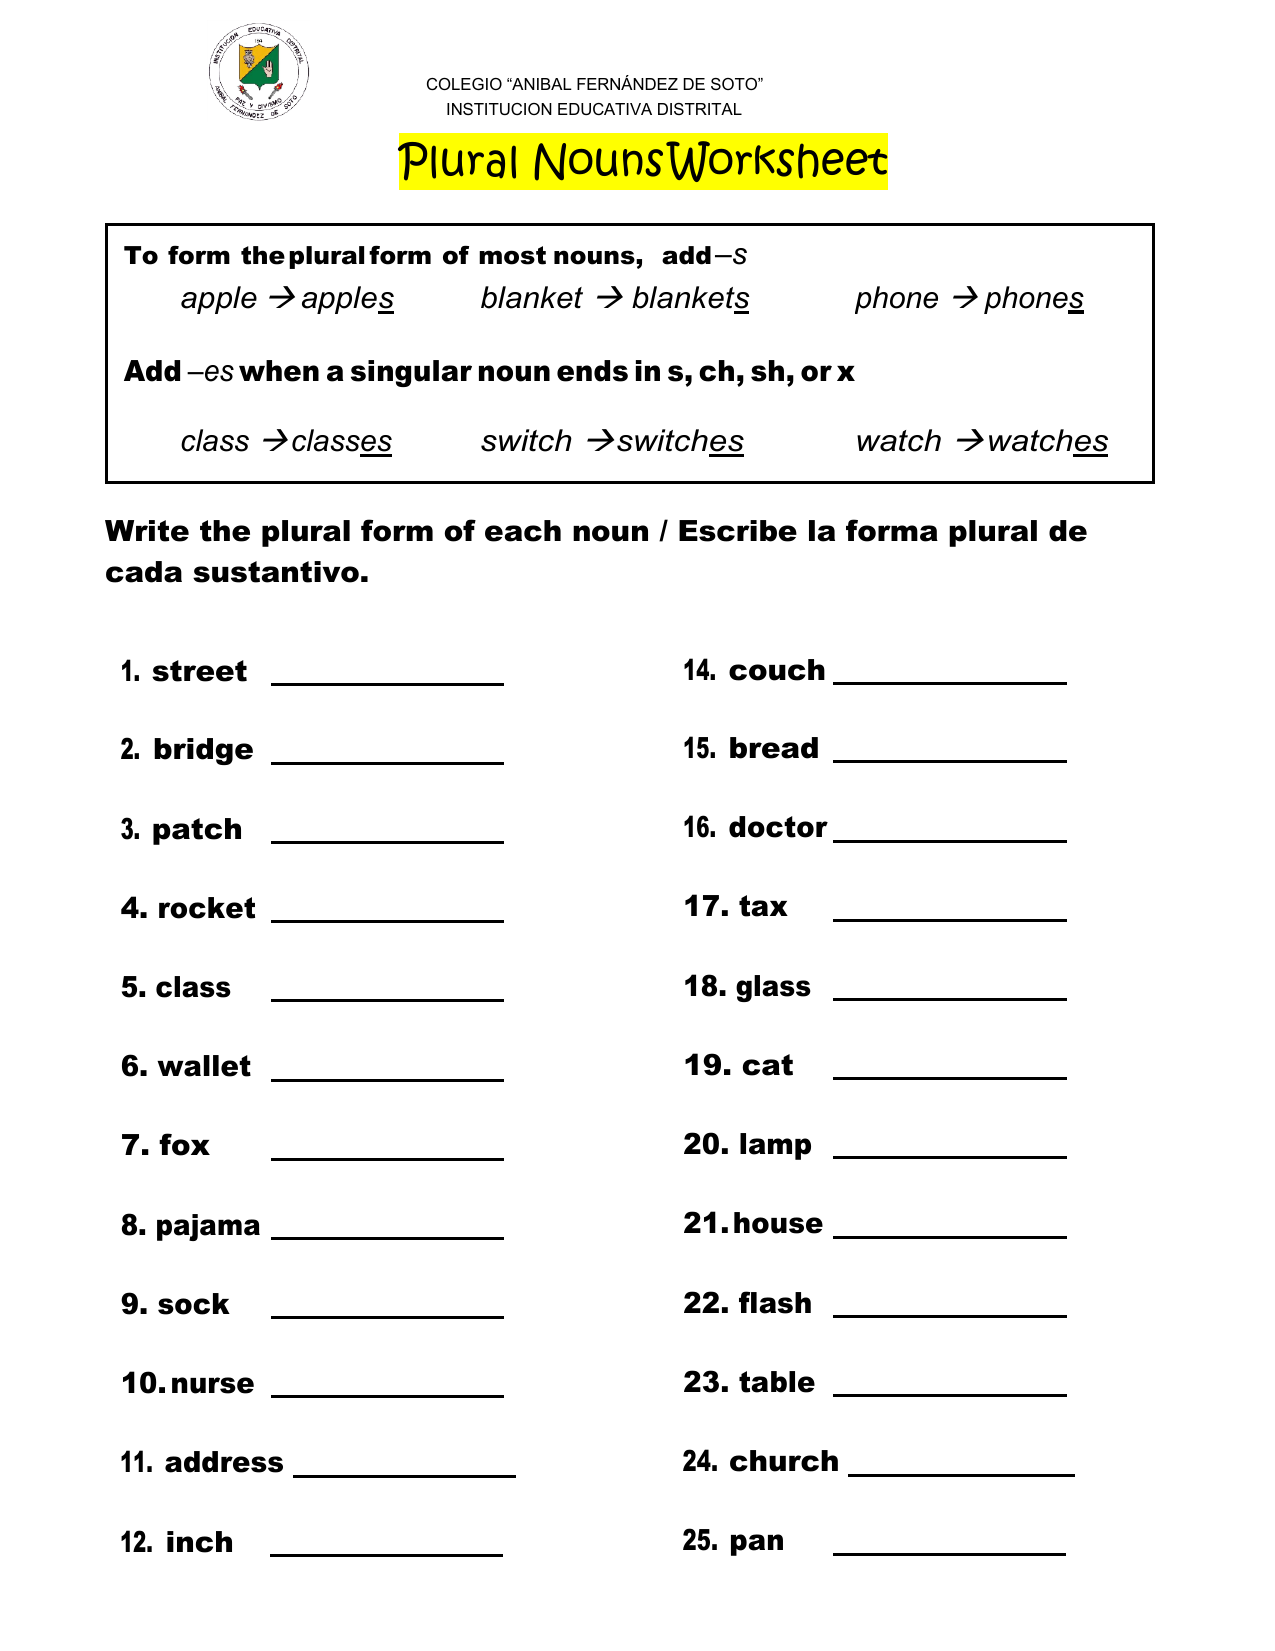 Free Printable Worksheets On Rules For Forming Plurals Of Nouns 